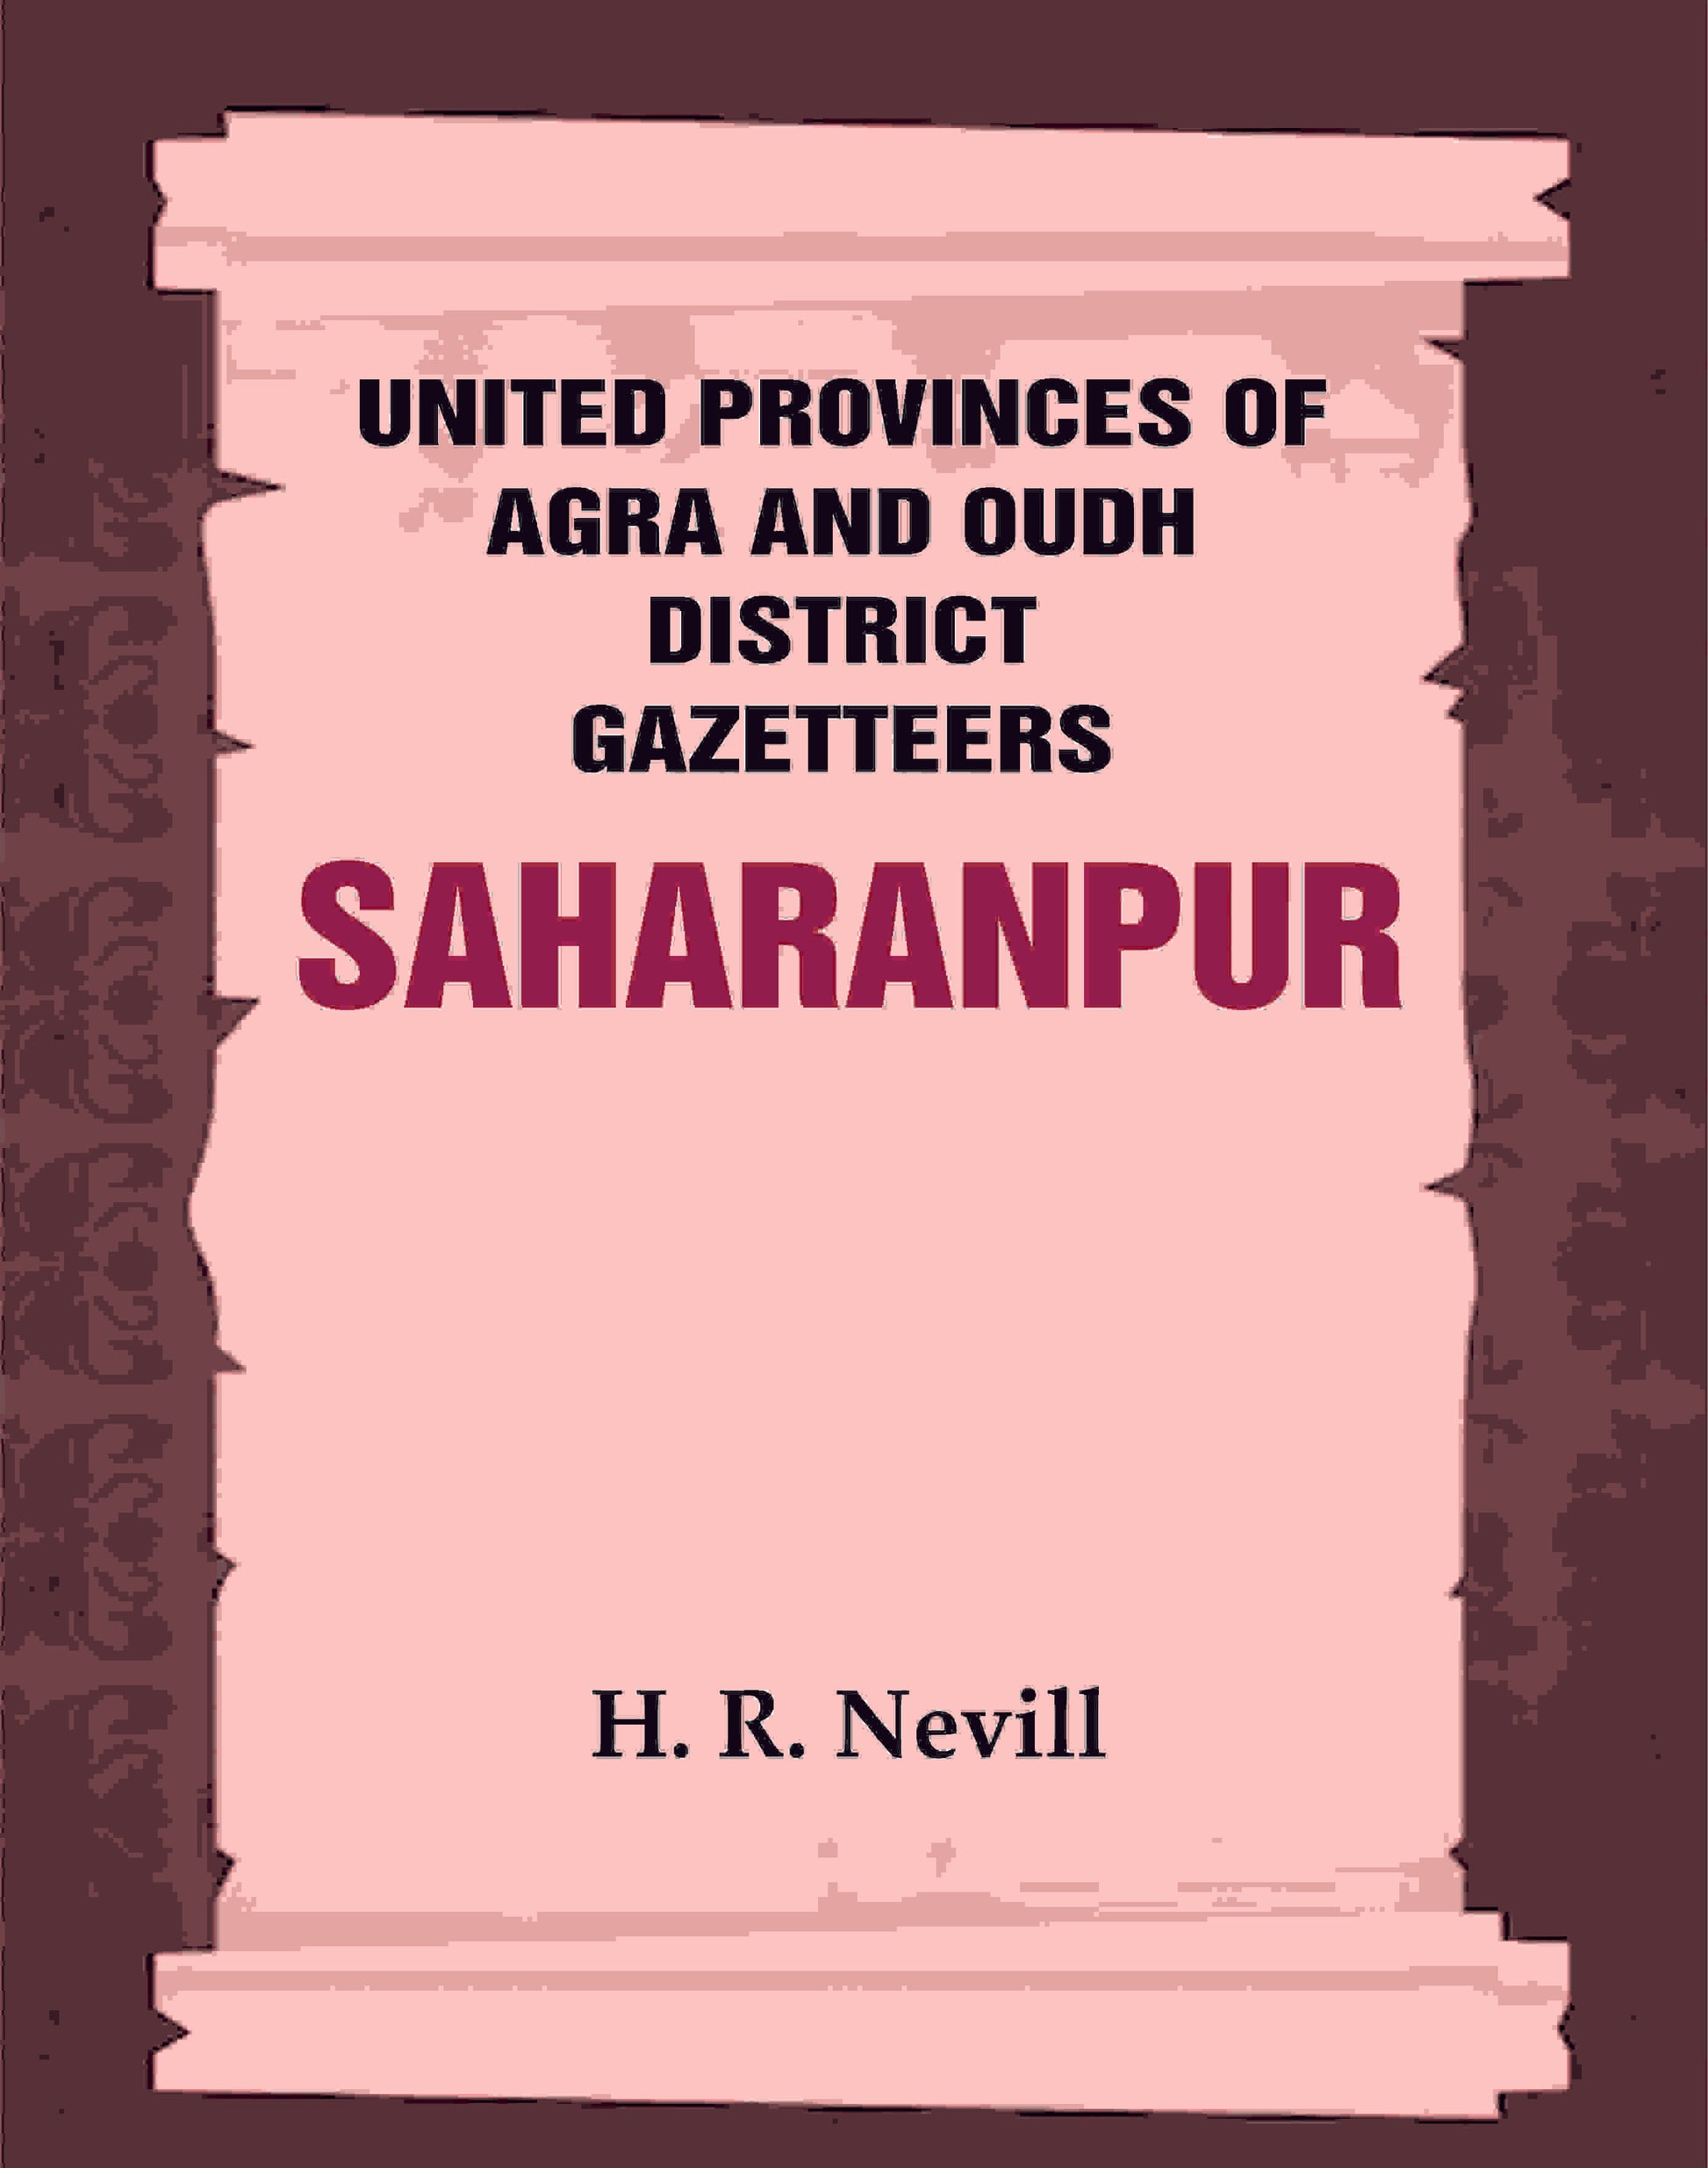 United Provinces of Agra and Oudh District Gazetteers: Saharanpur